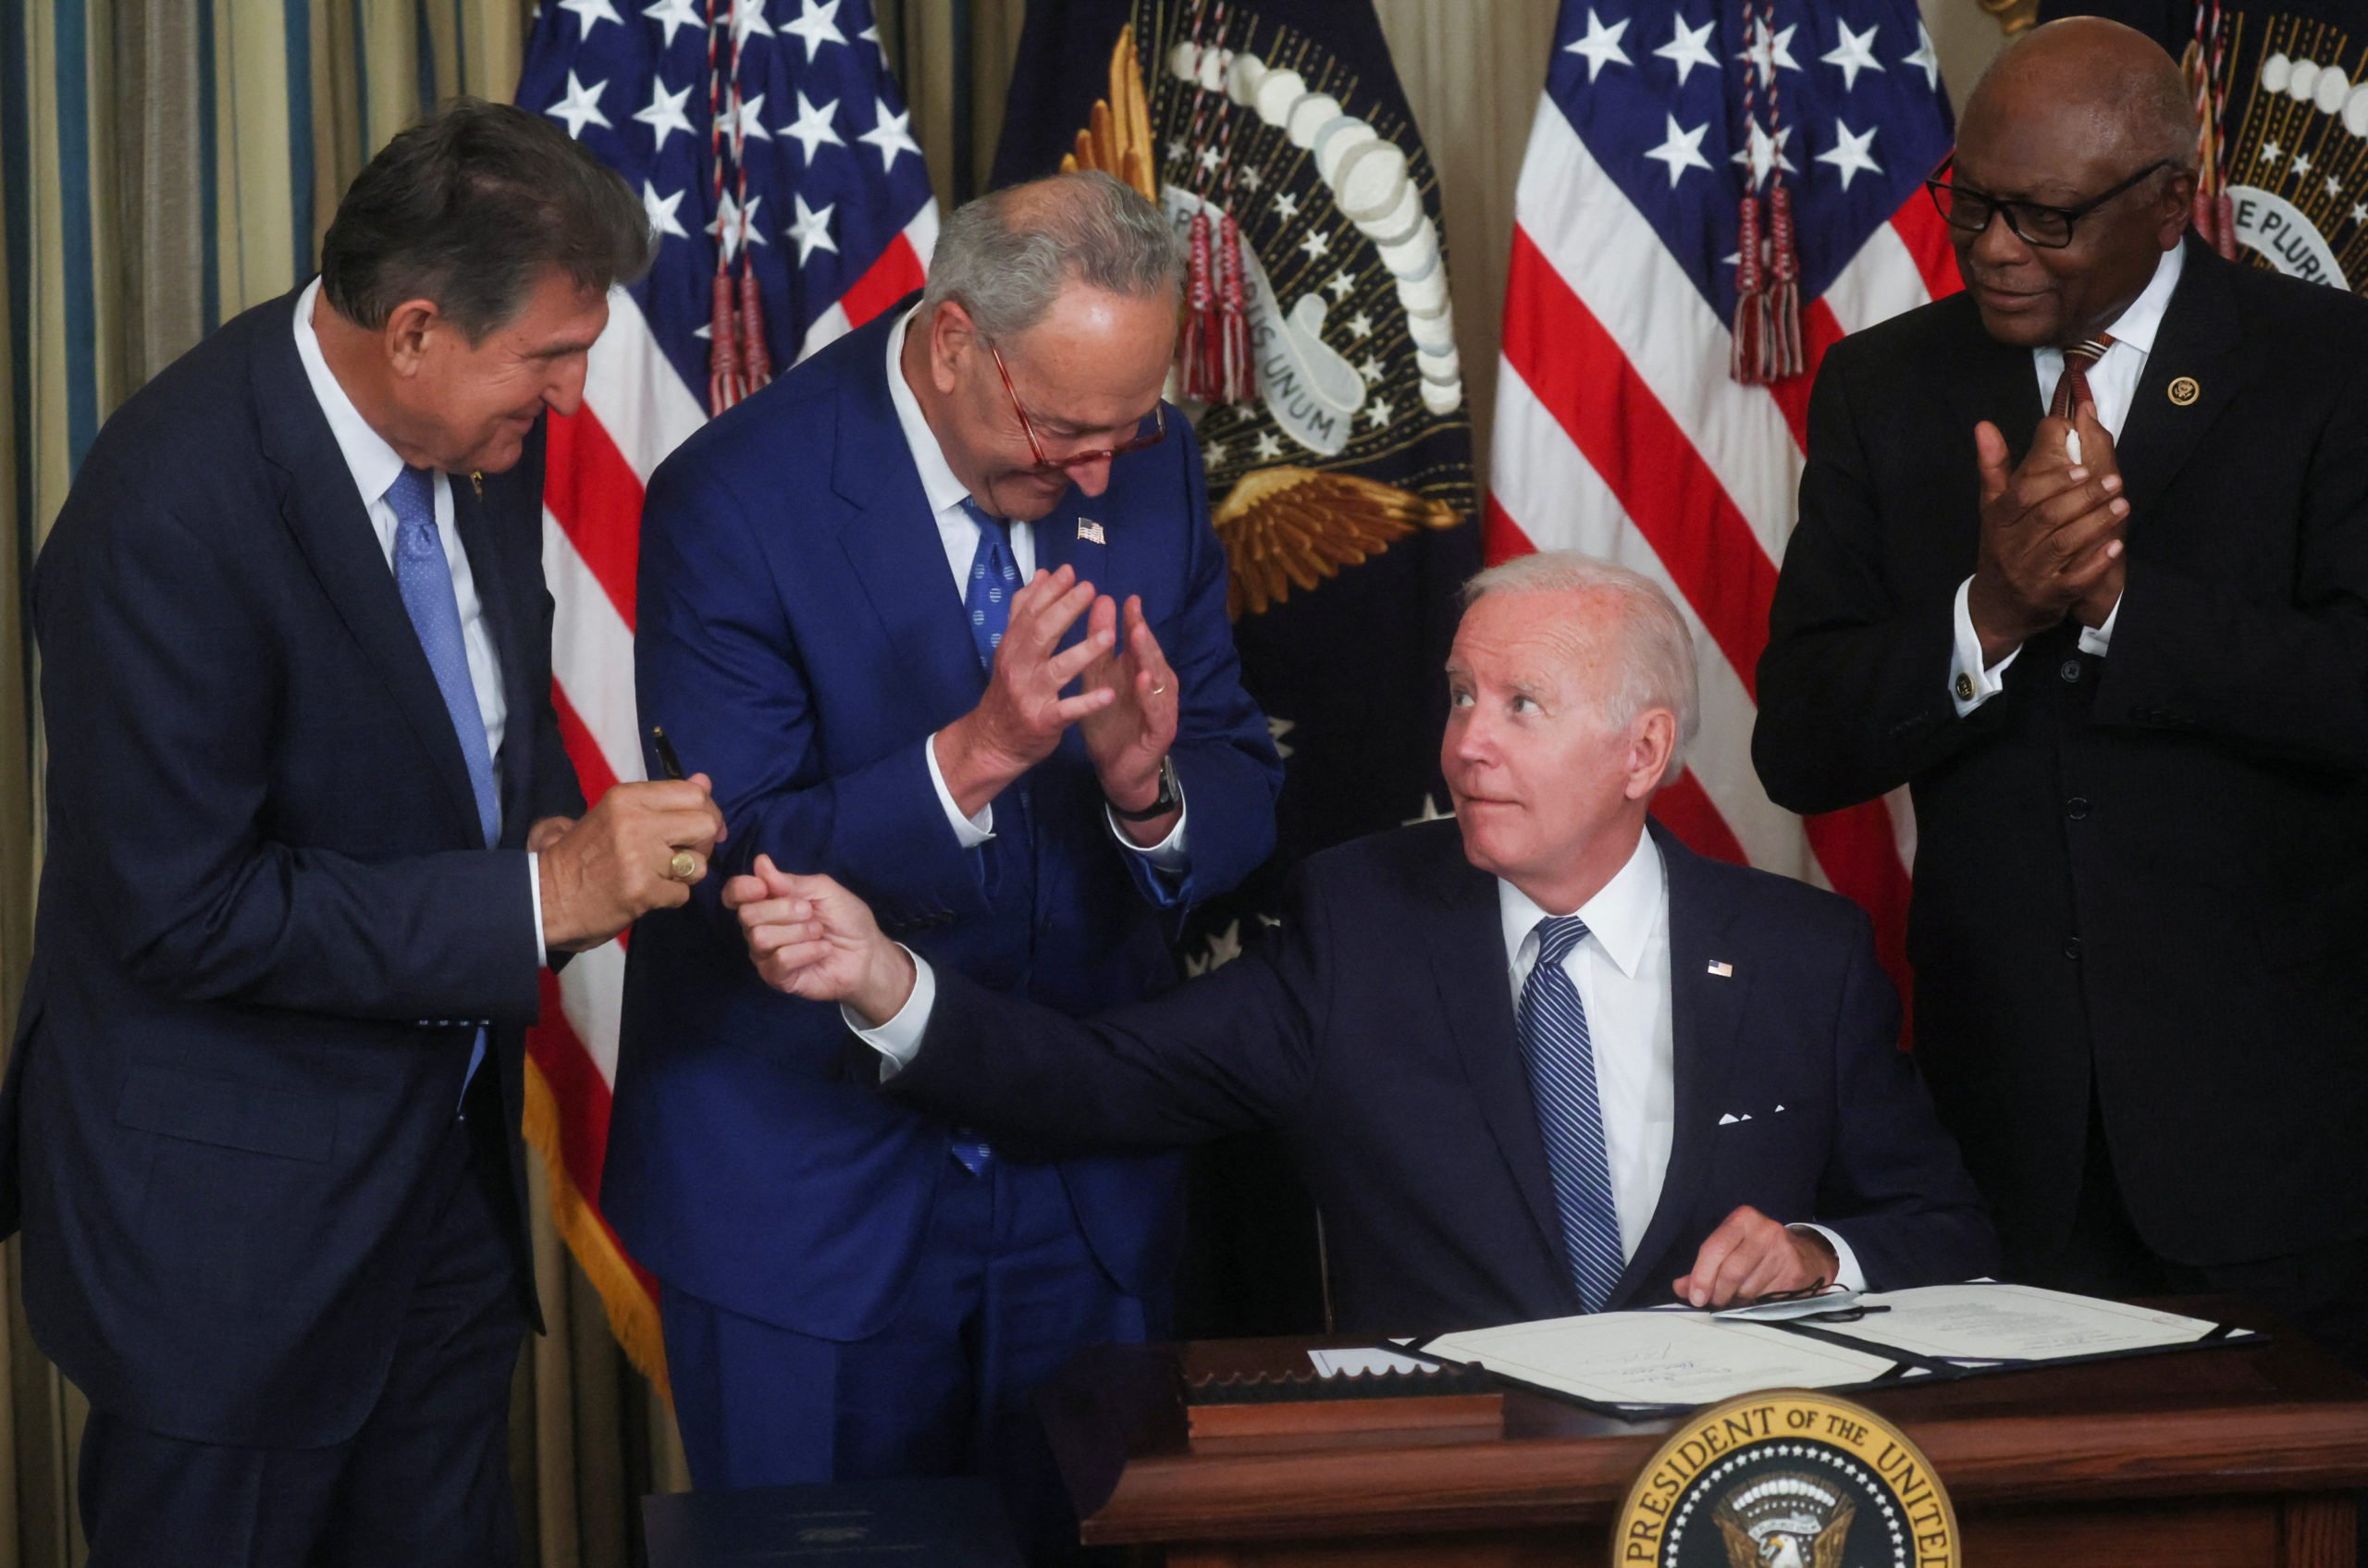 U.S. President Joe Biden hands his signing pen to U.S. Senator Joe Manchin (D-WV) as Senate Majority Leader Chuck Schumer (D-NY) and U.S. House Majority Whip James Clyburn (D-SC) look on immediately after Biden signed "The Inflation Reduction Act of 2022" into law during a ceremony in the State Dining Room of the White House in Washington, U.S. August 16, 2022. REUTERS/Leah Millis